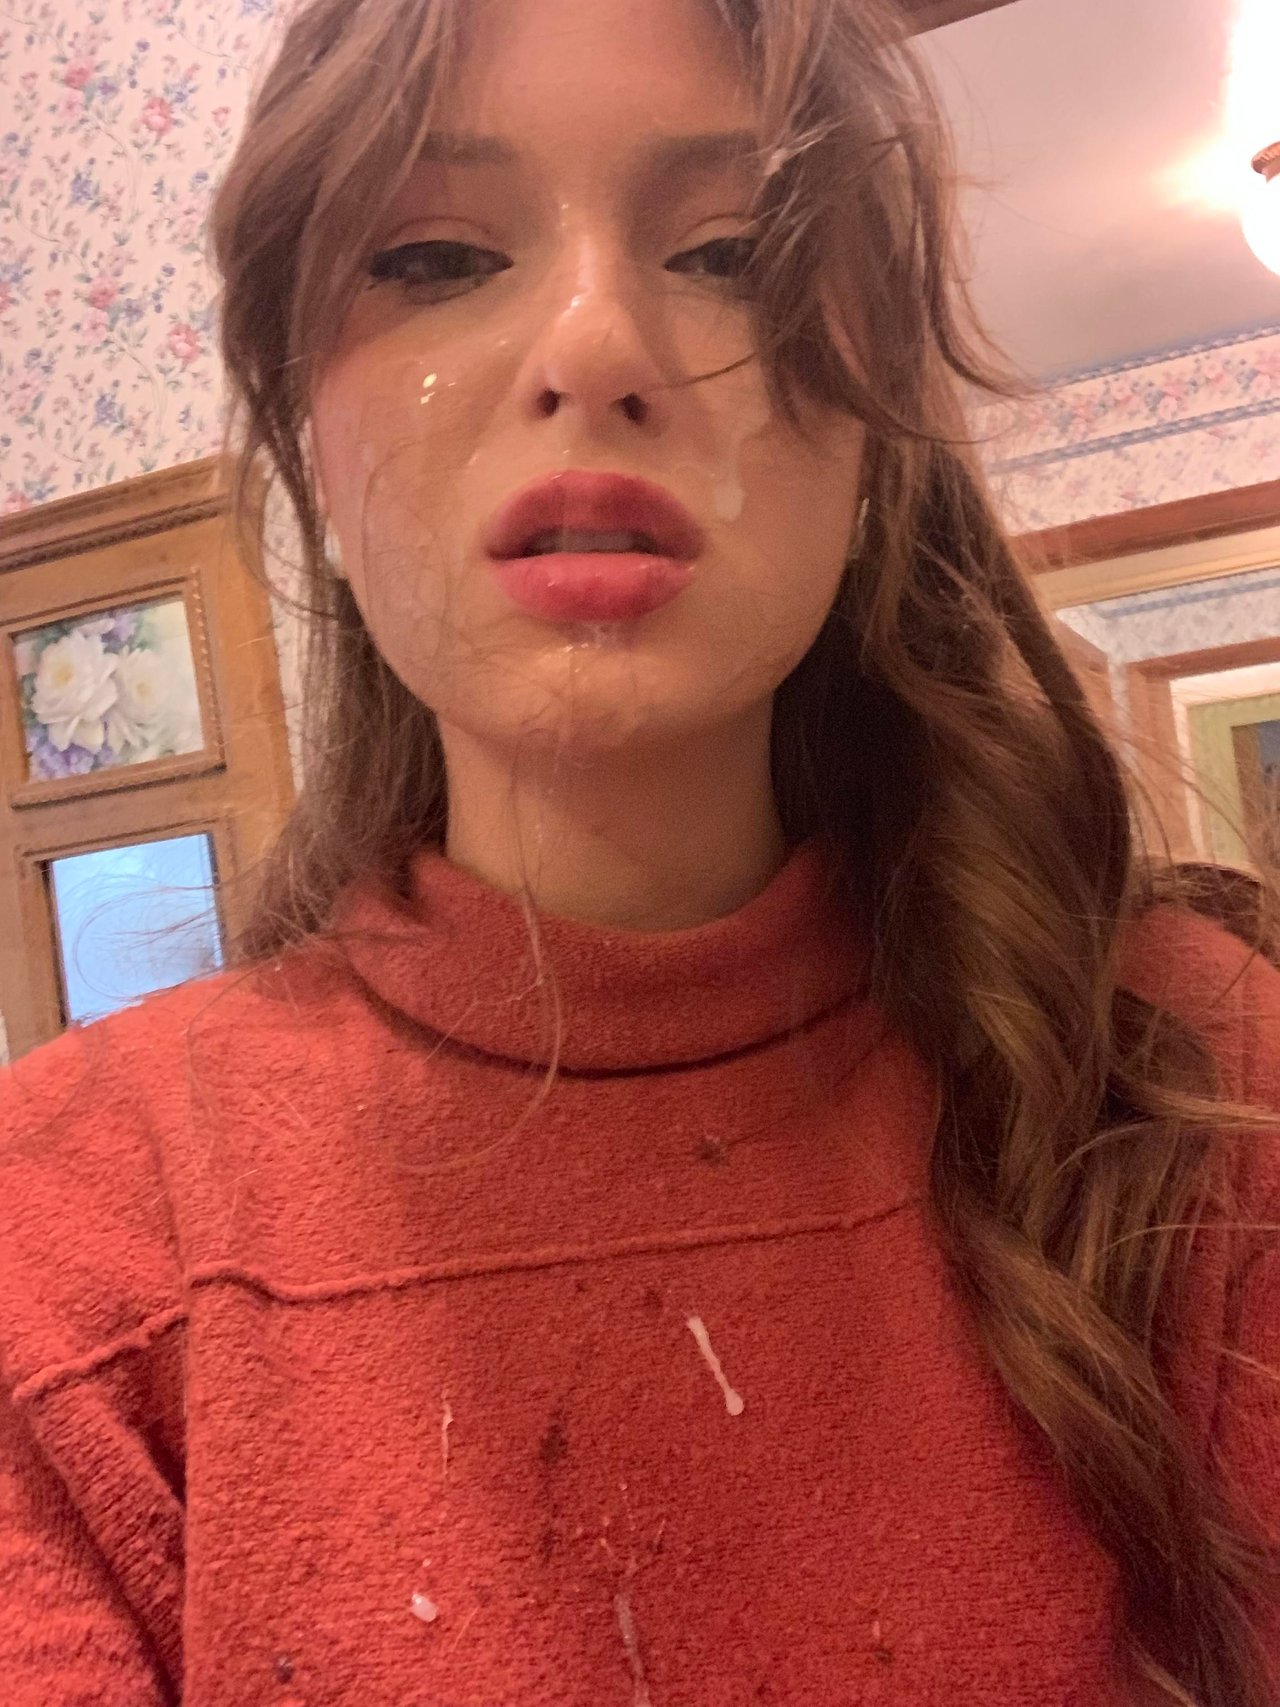 Pouty lips after face fucking oc.